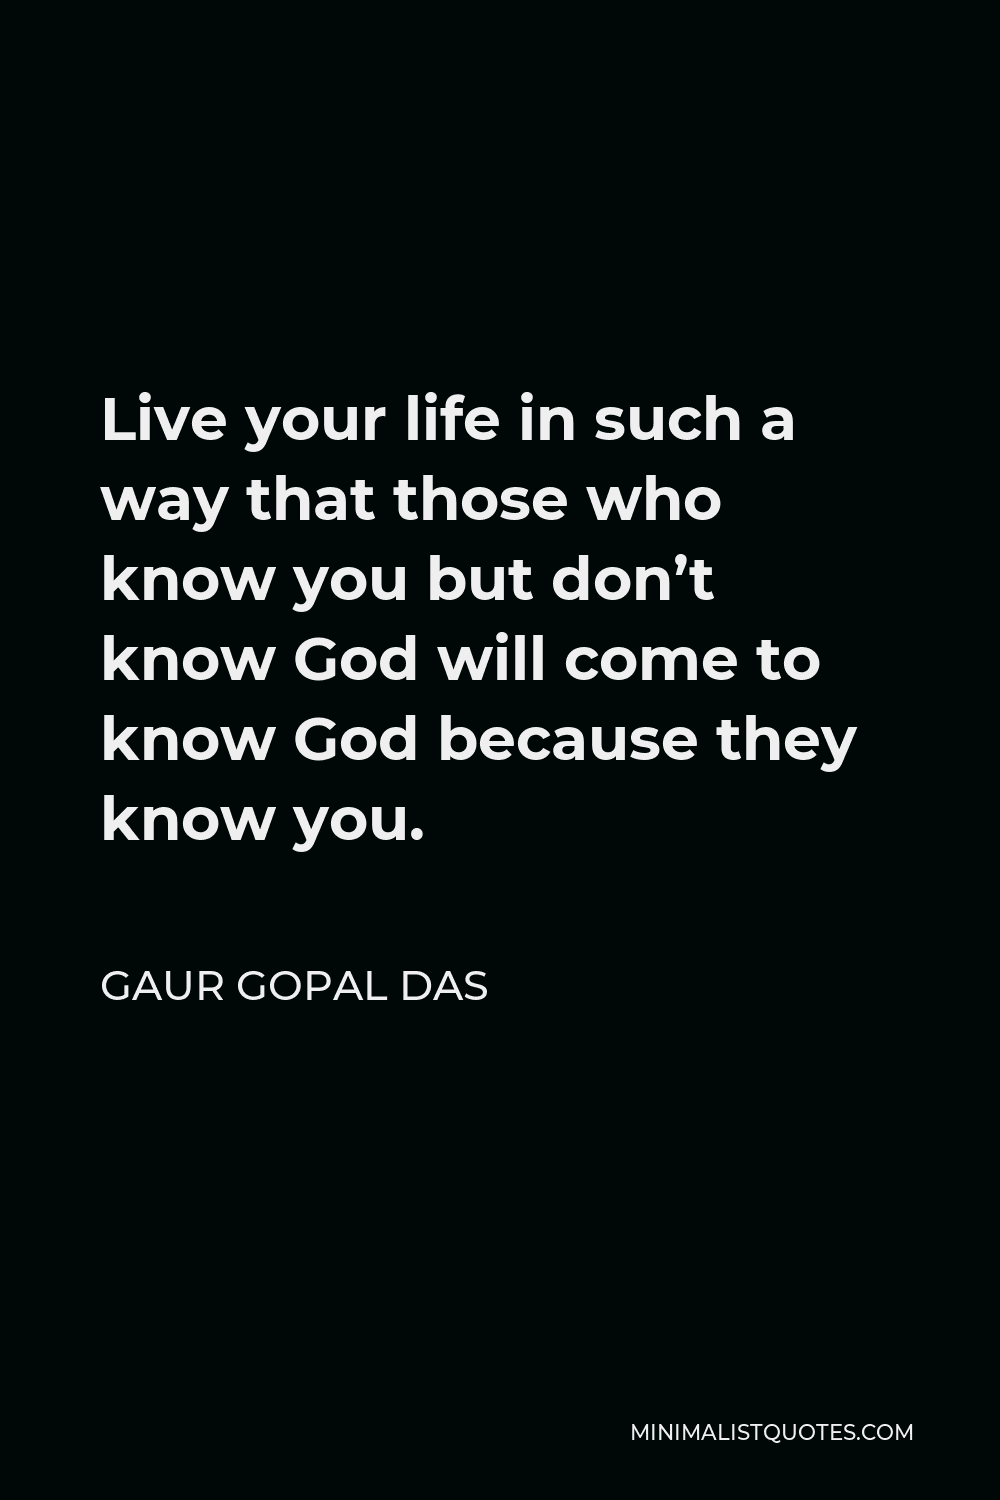 Gaur Gopal Das Quote - Live your life in such a way that those who know you but don’t know God will come to know God because they know you.